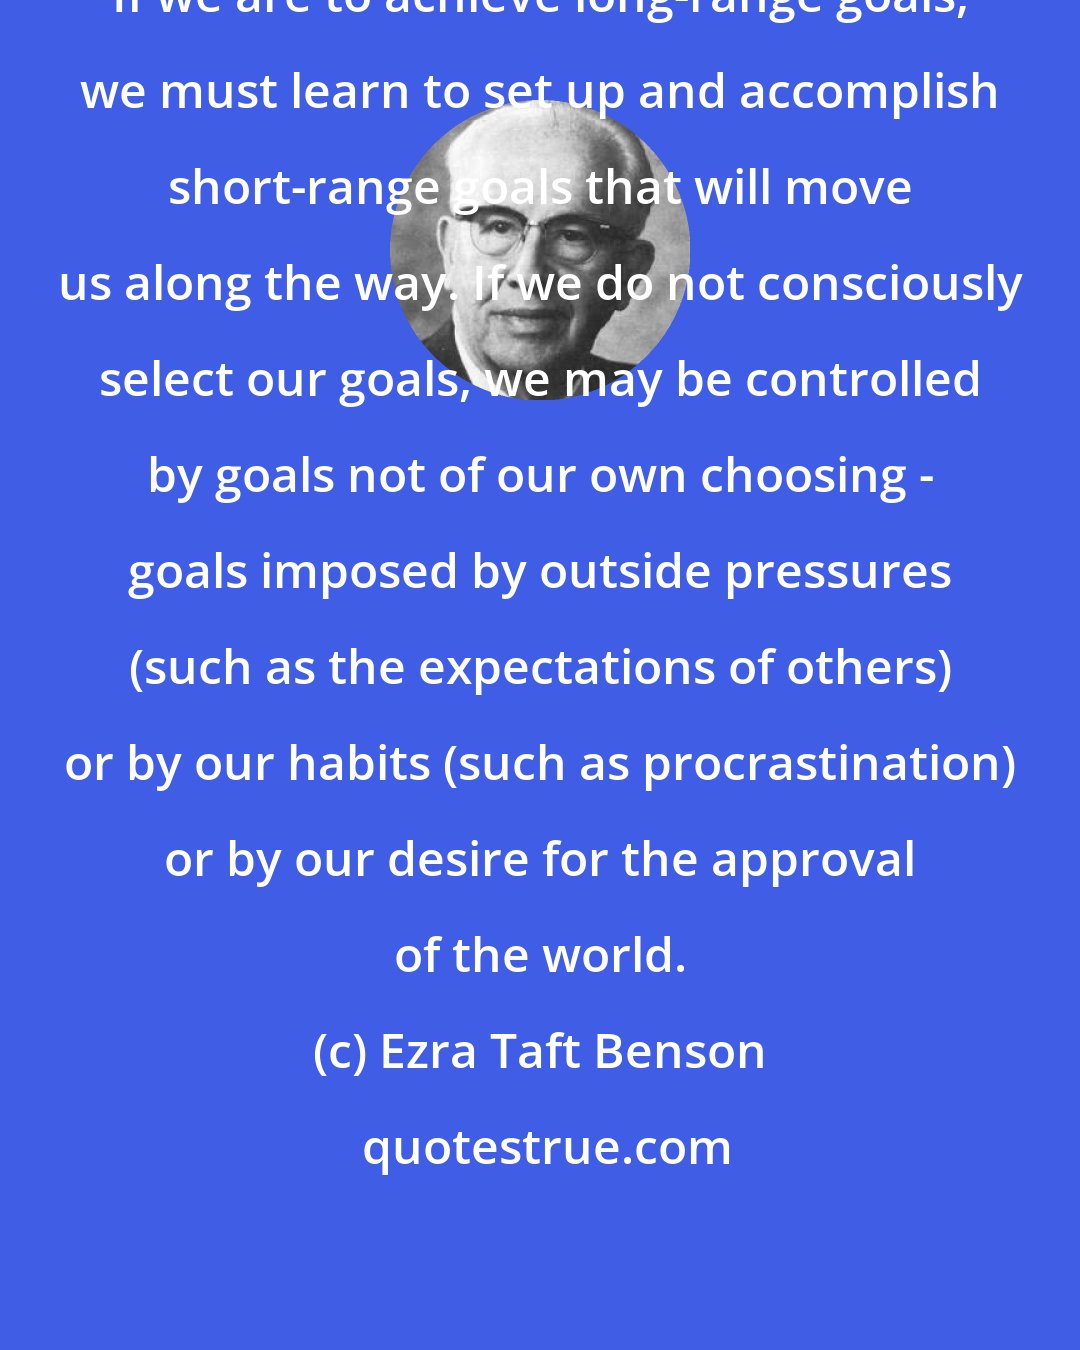 Ezra Taft Benson: If we are to achieve long-range goals, we must learn to set up and accomplish short-range goals that will move us along the way. If we do not consciously select our goals, we may be controlled by goals not of our own choosing - goals imposed by outside pressures (such as the expectations of others) or by our habits (such as procrastination) or by our desire for the approval of the world.